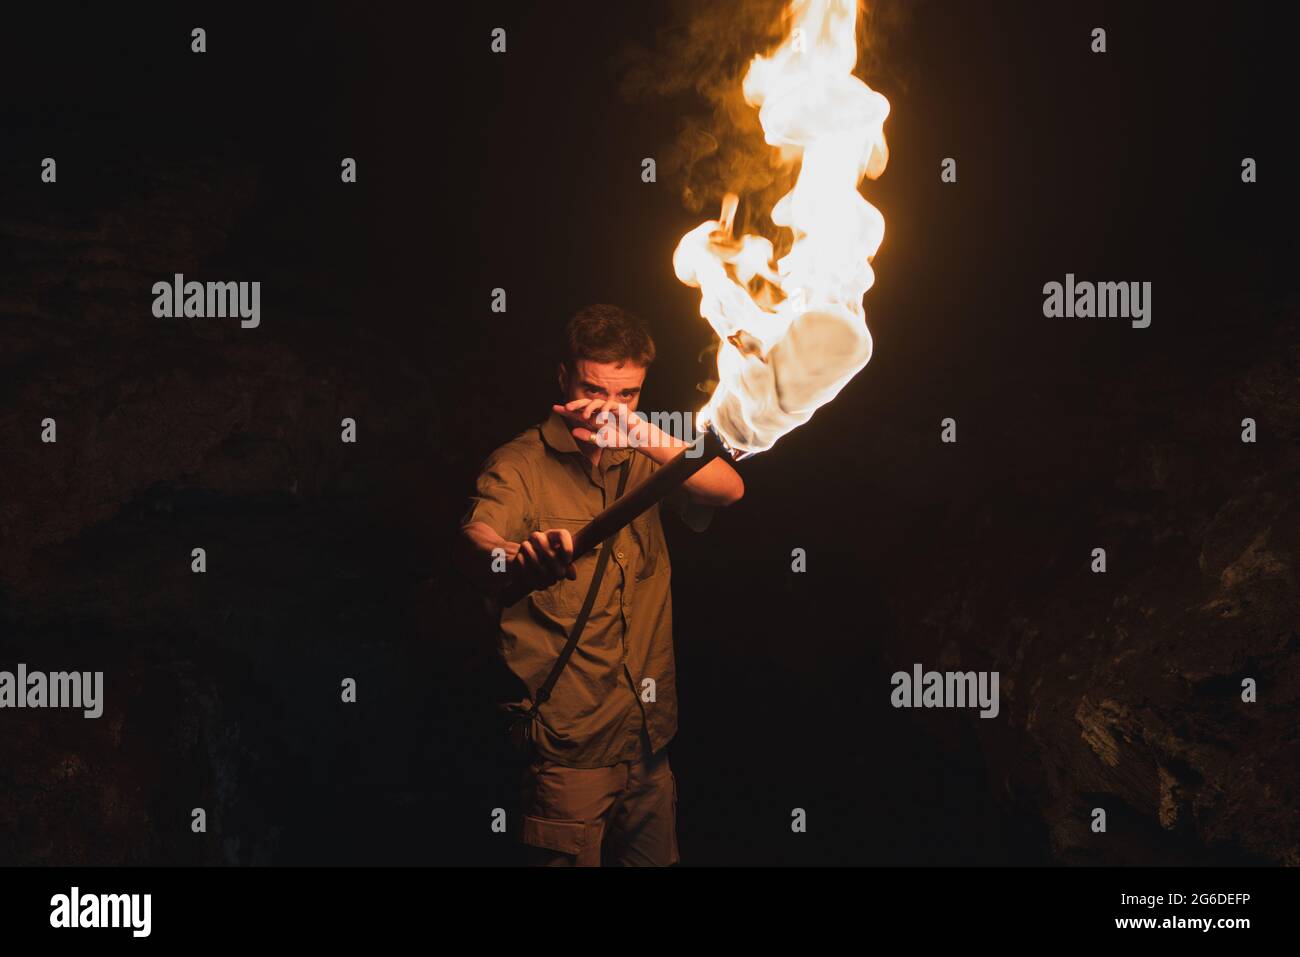 Young male speleologist with flaming torch standing in dark narrow rocky cave while exploring subterranean environment Stock Photo